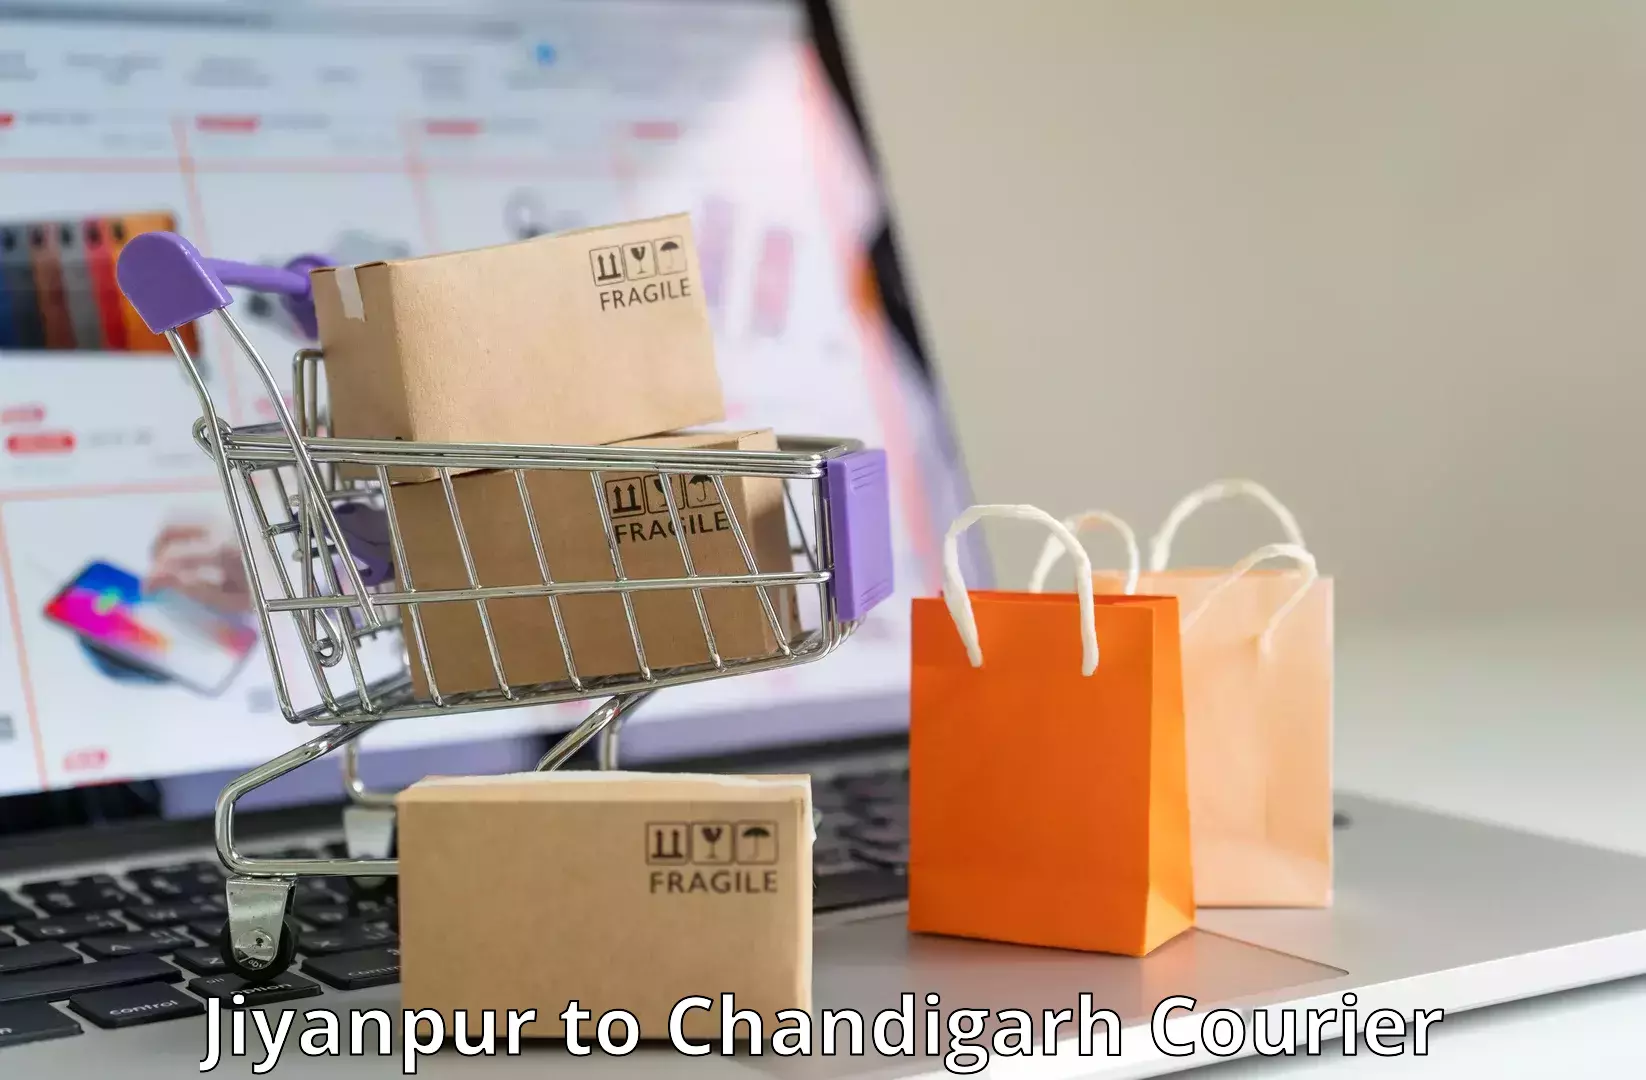 Express delivery capabilities Jiyanpur to Panjab University Chandigarh